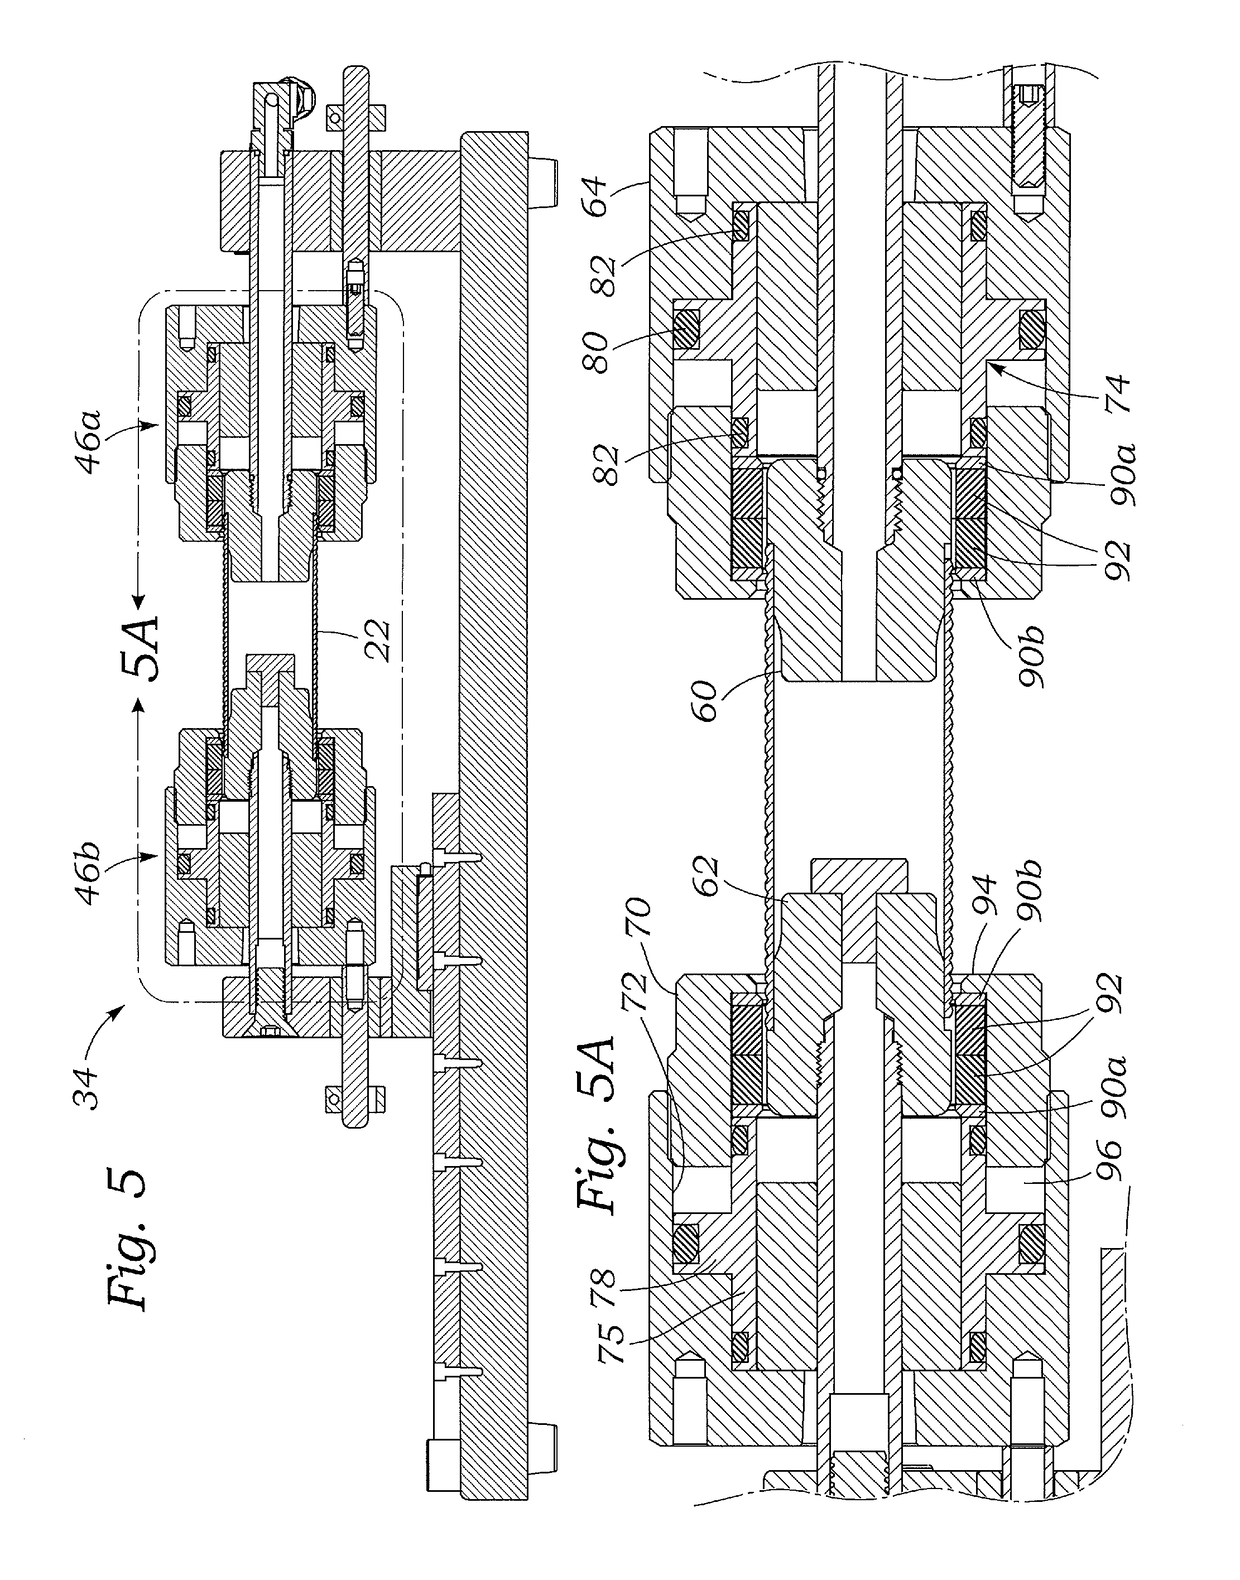 Methods of leak testing a surgical conduit